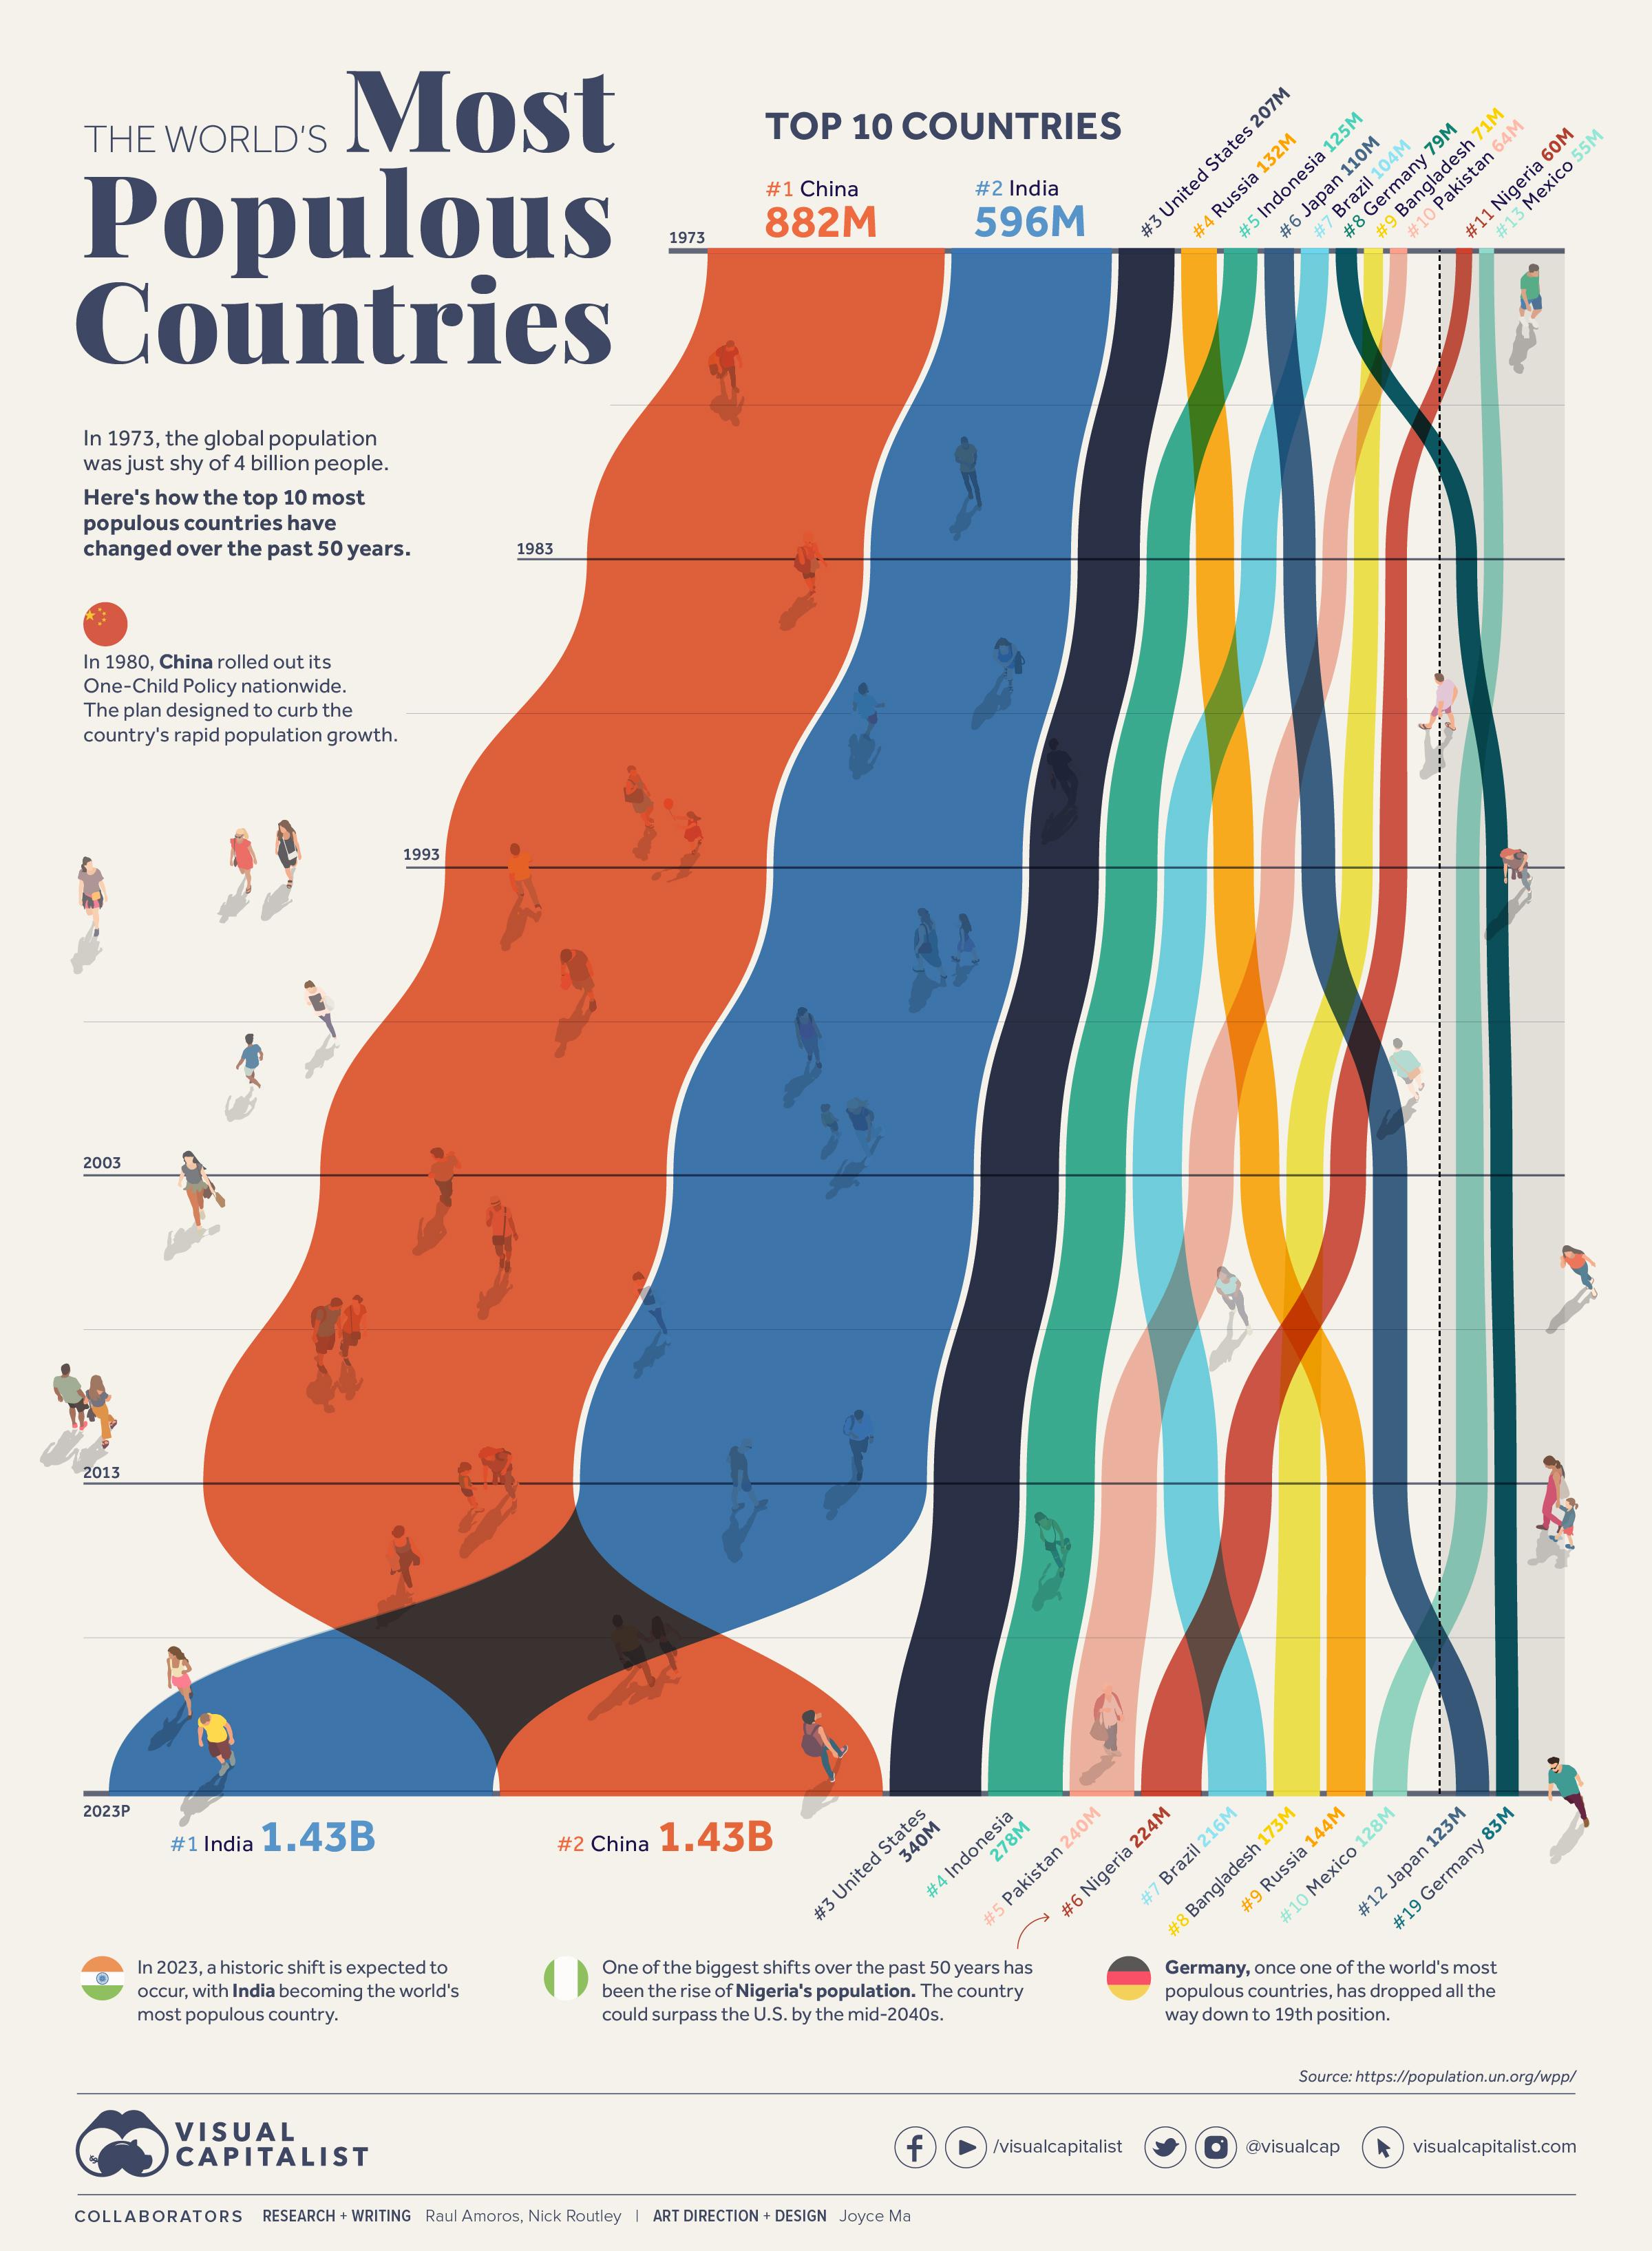 Data visualization showing the world's top 10 most populous countries over the past 50 years